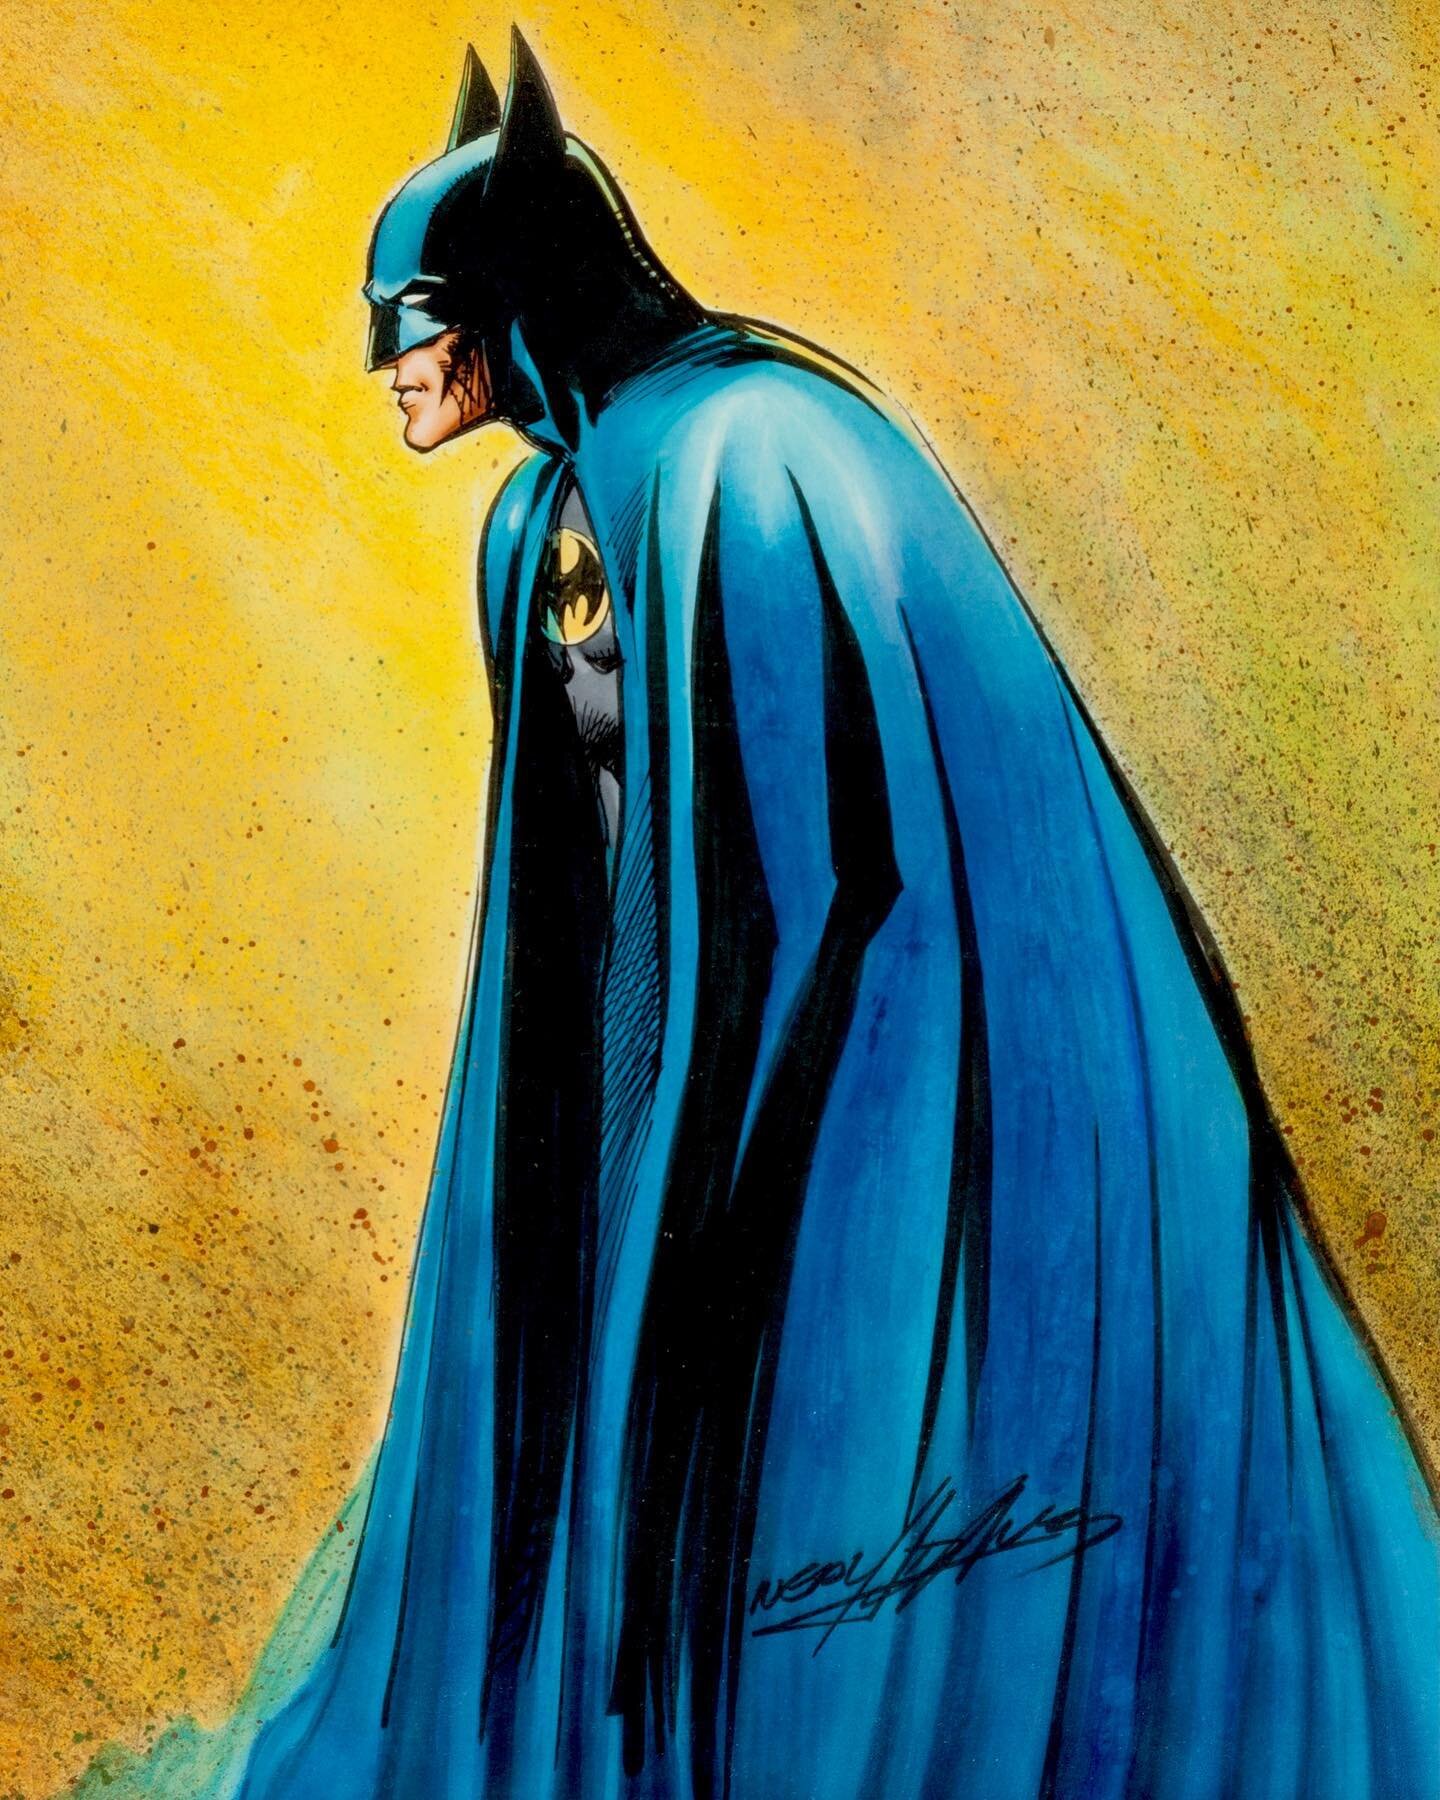 Rest In Peace to the great @thenealadams Your Batman is still my Batman. Your panels were inspiring, alive and epic. Your art always felt immortal, like it would be here forever &mdash; because of course it was, is and will be. #ripnealadams #batman 